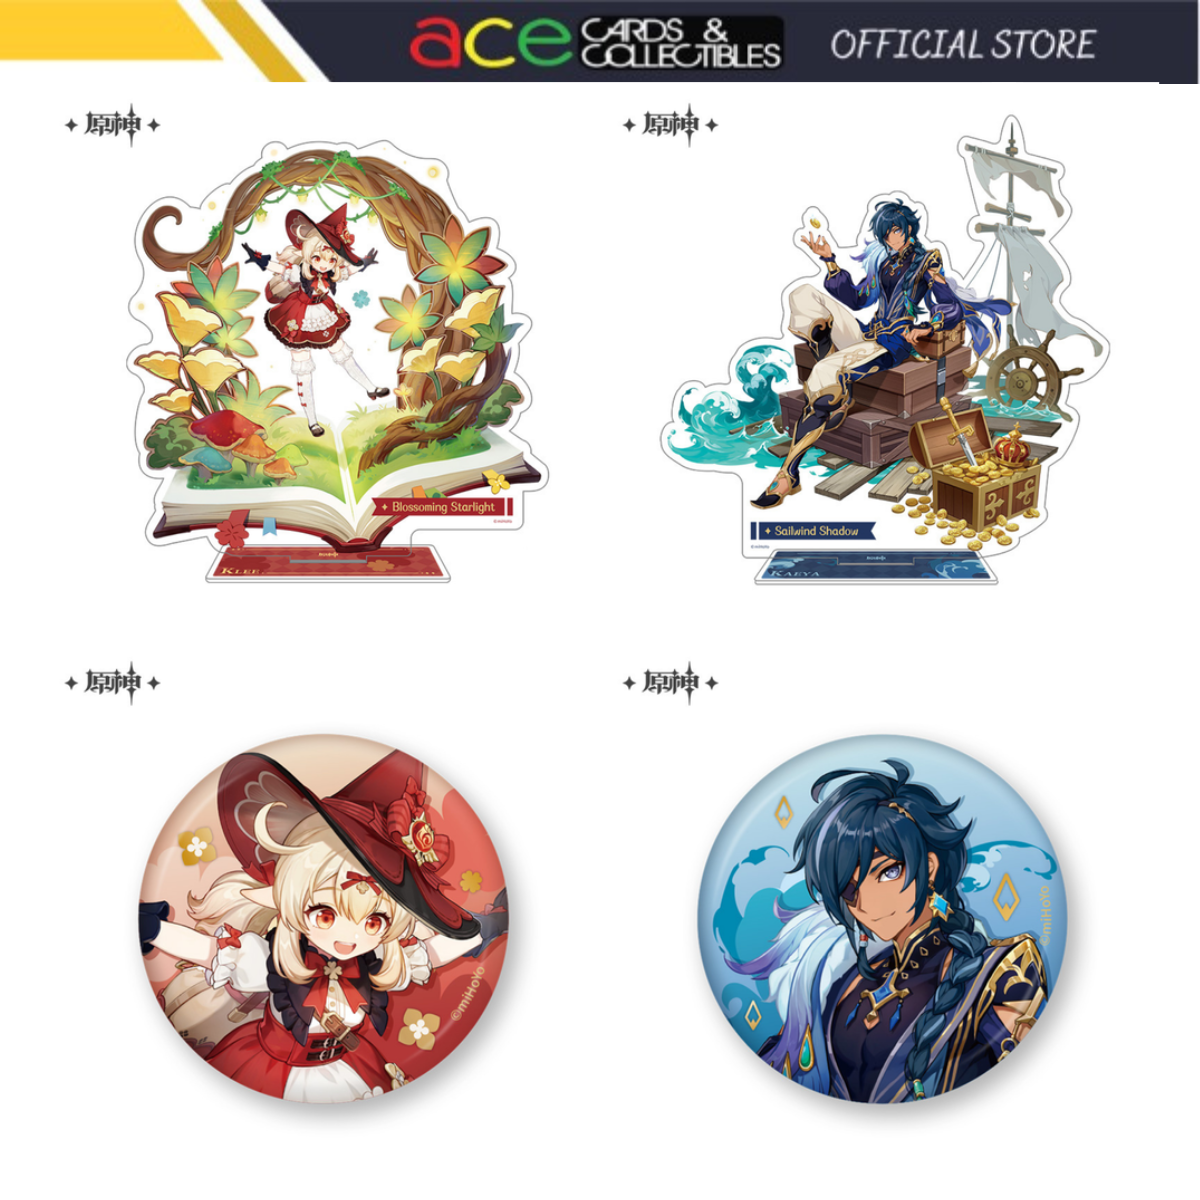 miHoYo Genshin Impact Teyvat Style Character Outfit Badge & Standee-Klee (Badge)-miHoYo-Ace Cards & Collectibles